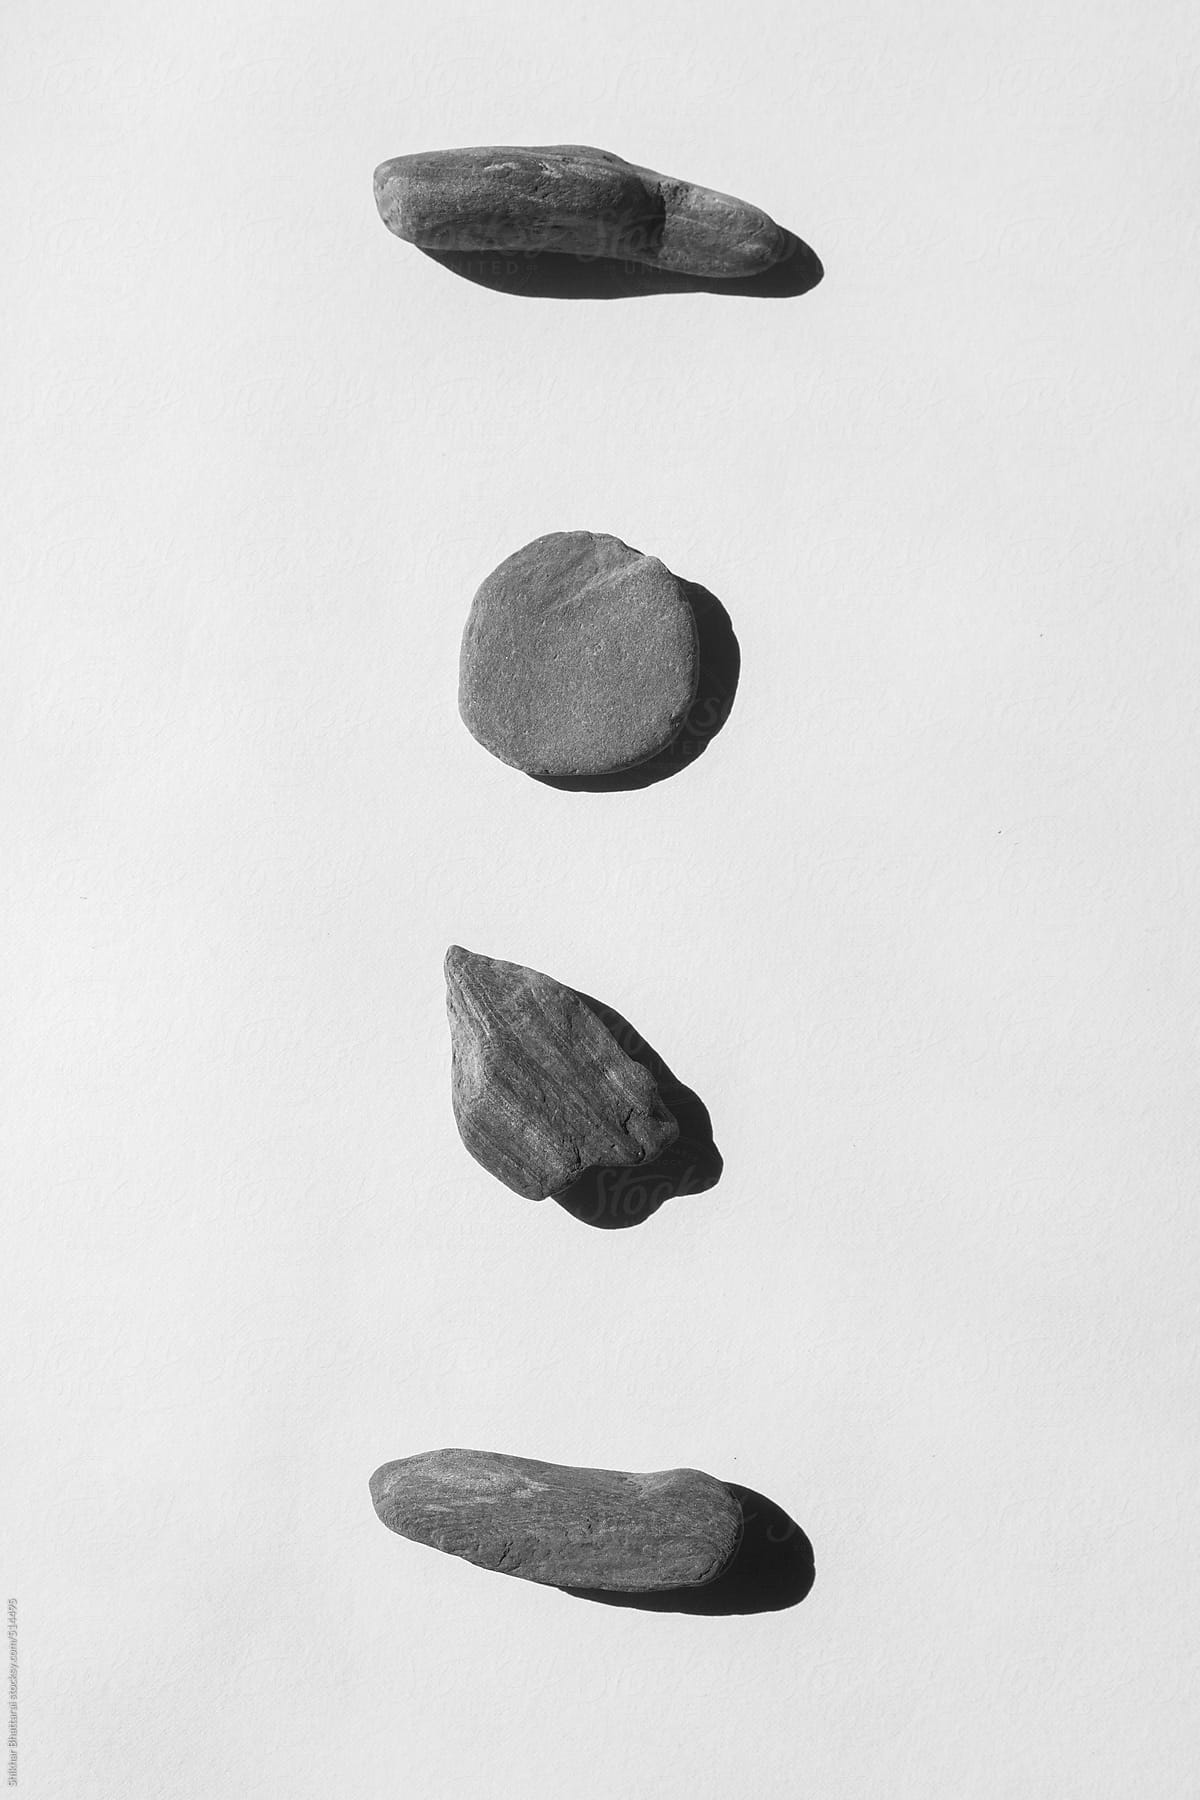 Stones on a white background.